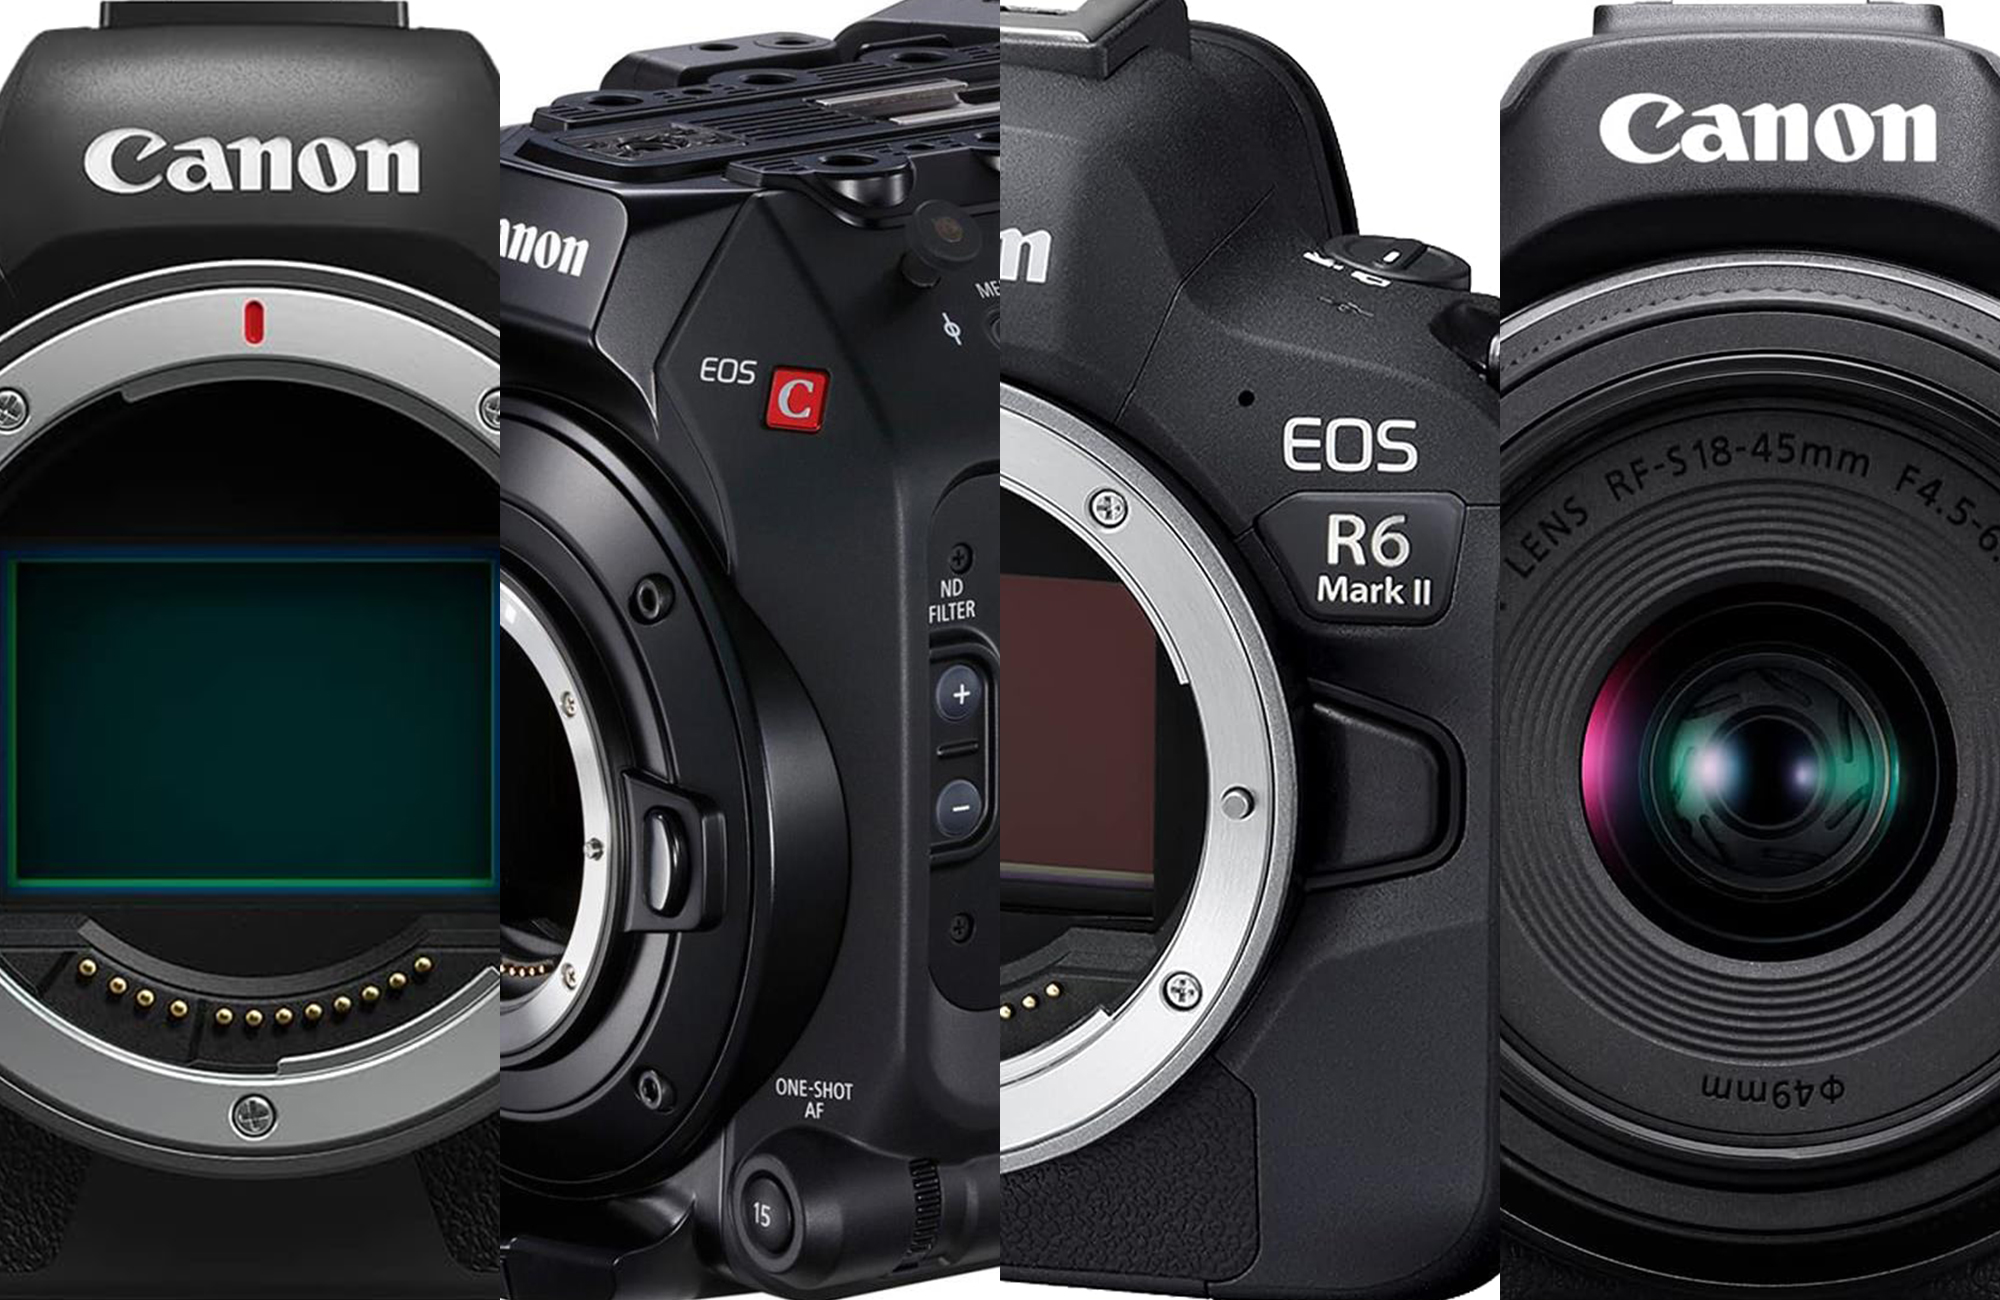 5 best lenses for shooting video with a Canon camera (with video examples)